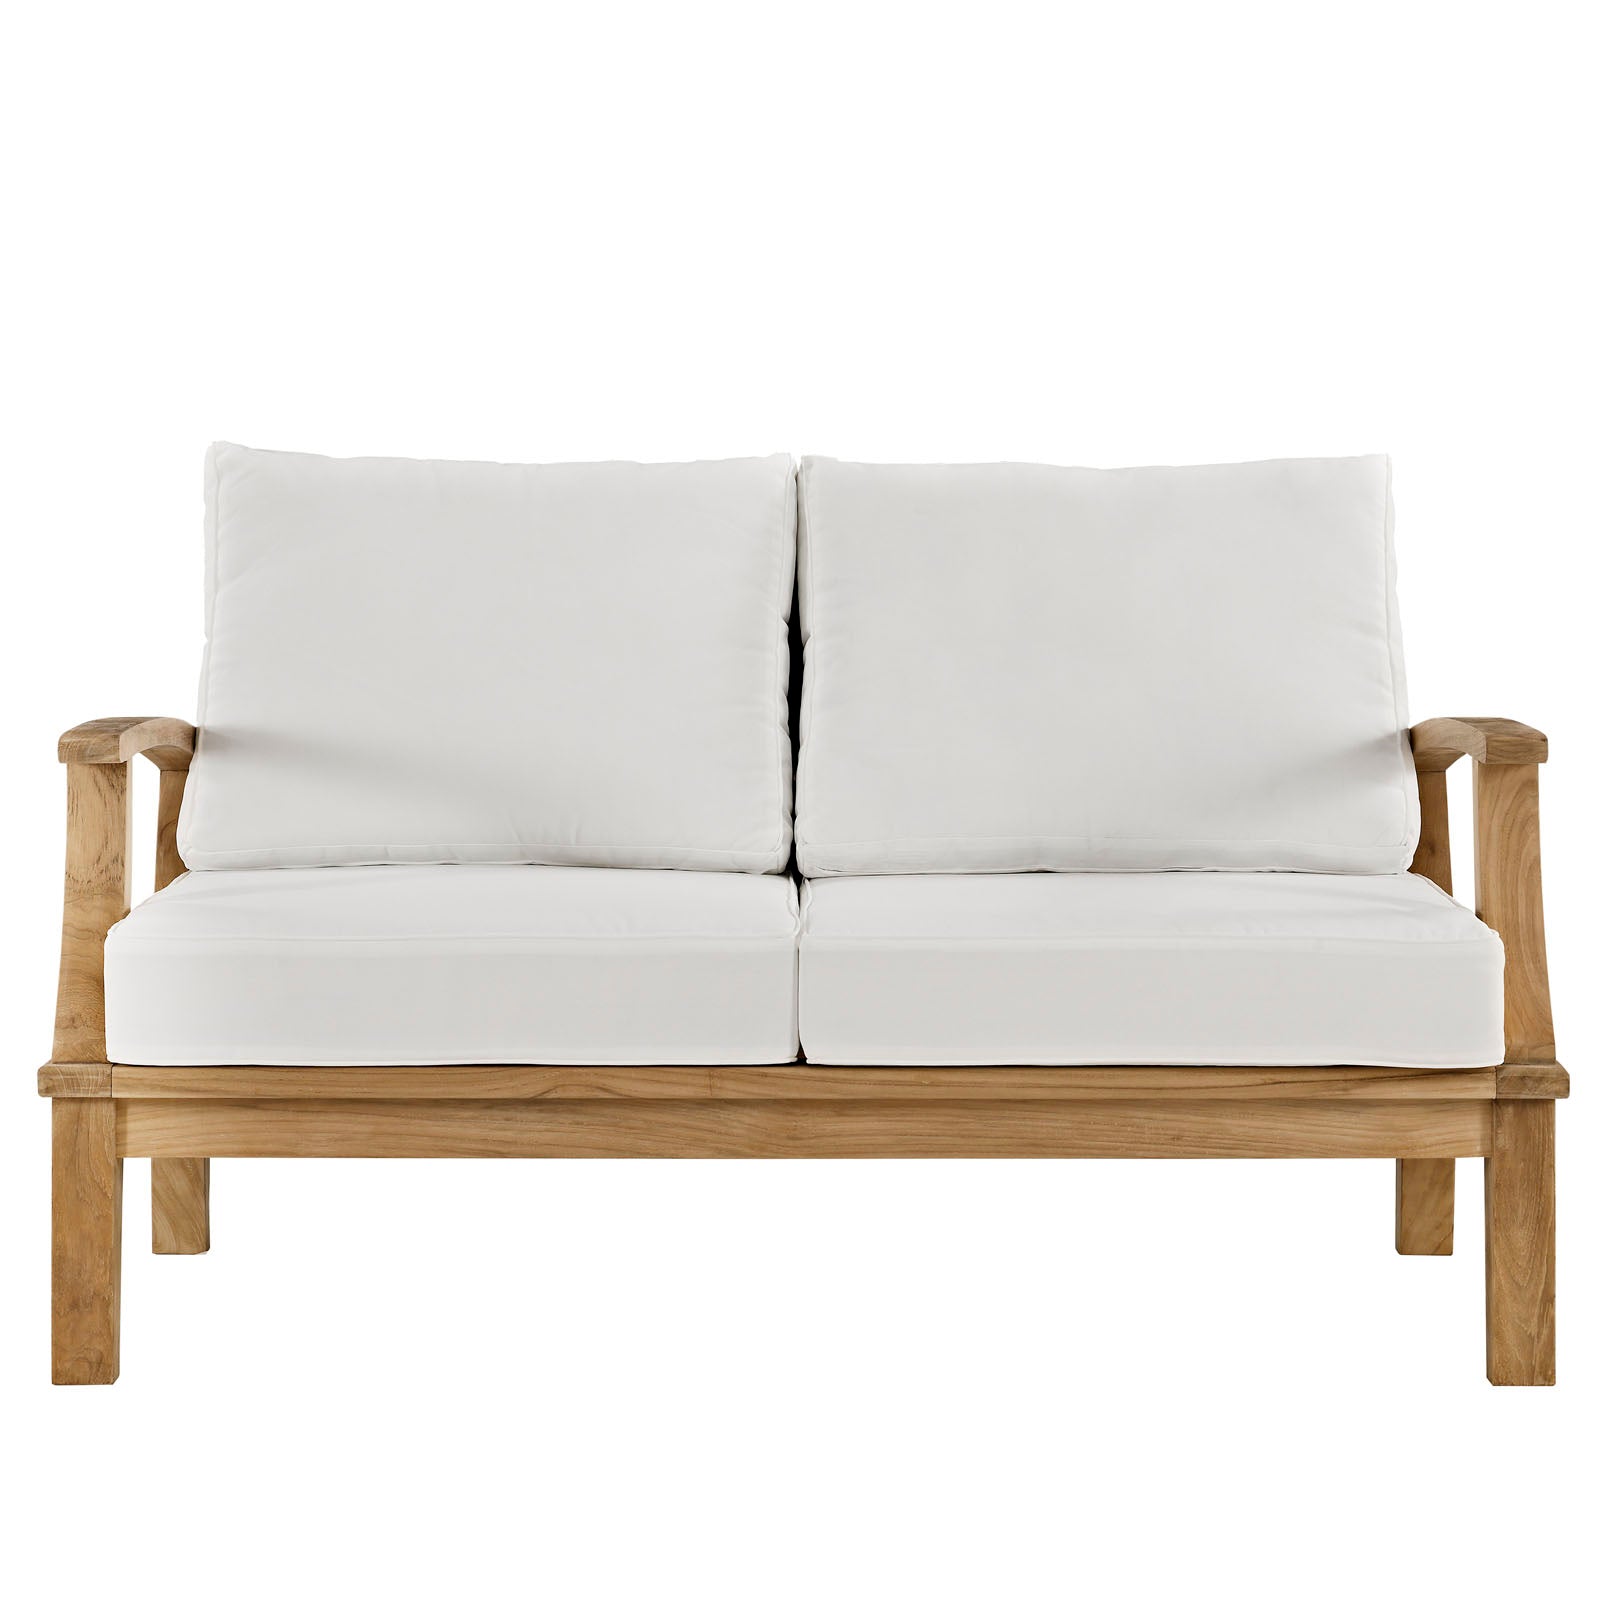 Modway Outdoor Sofas - Marina Outdoor Loveseat White & Natural